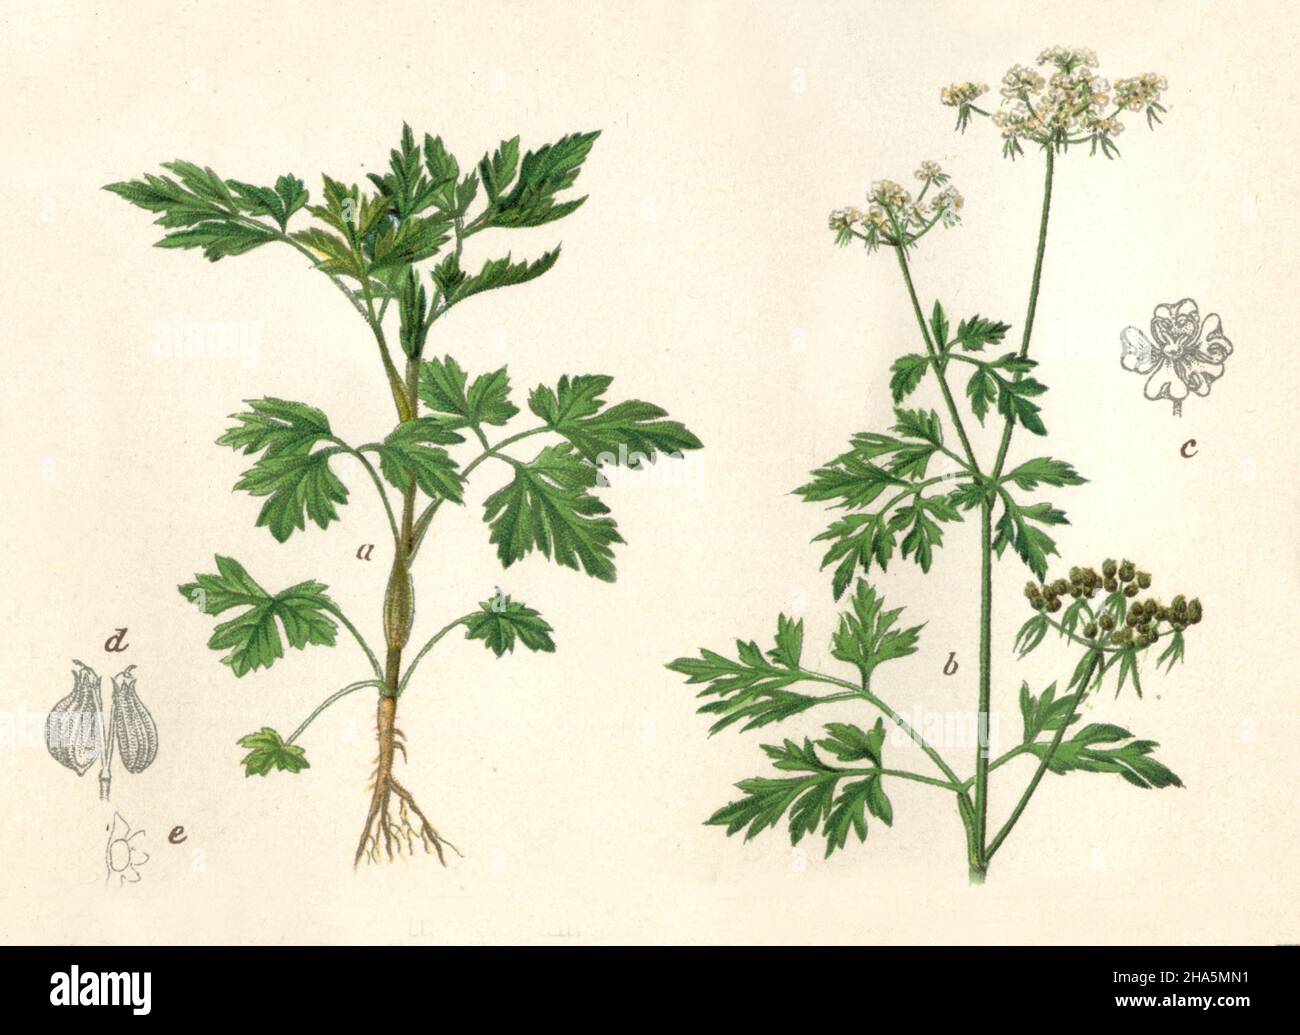 fool's parsley, fool's cicely, or poison parsley Aethusa cynapium,  (encyclopedia, 1898) Stock Photo